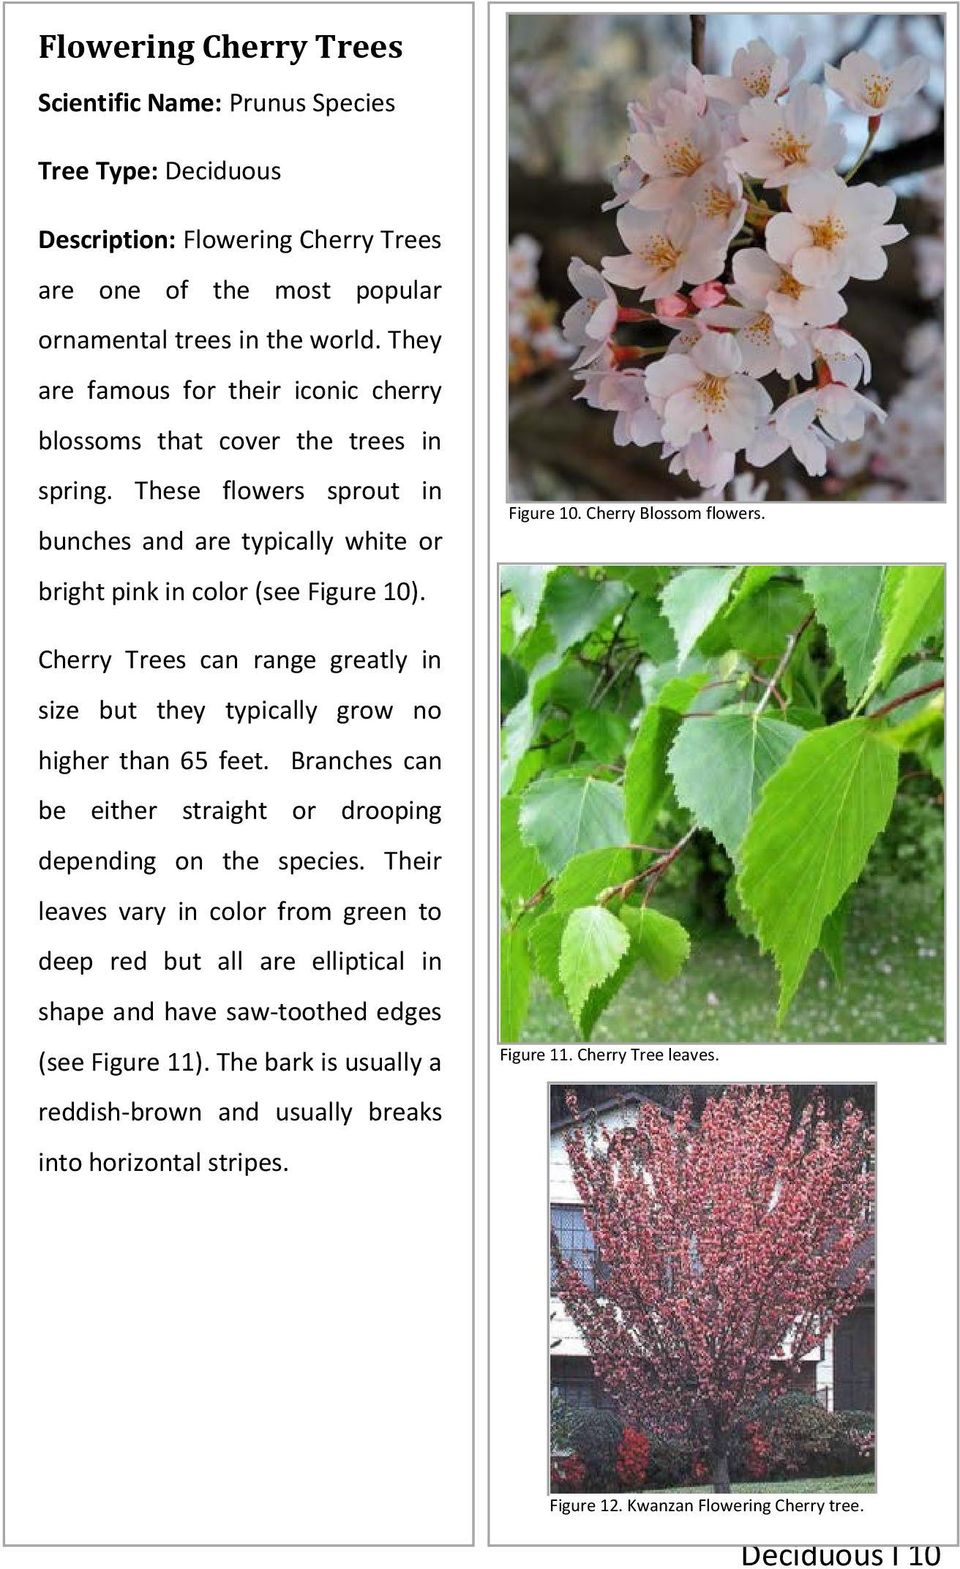 Cherry Trees can range greatly in size but they typically grow no higher than 65 feet. Branches can be either straight or drooping depending on the species.